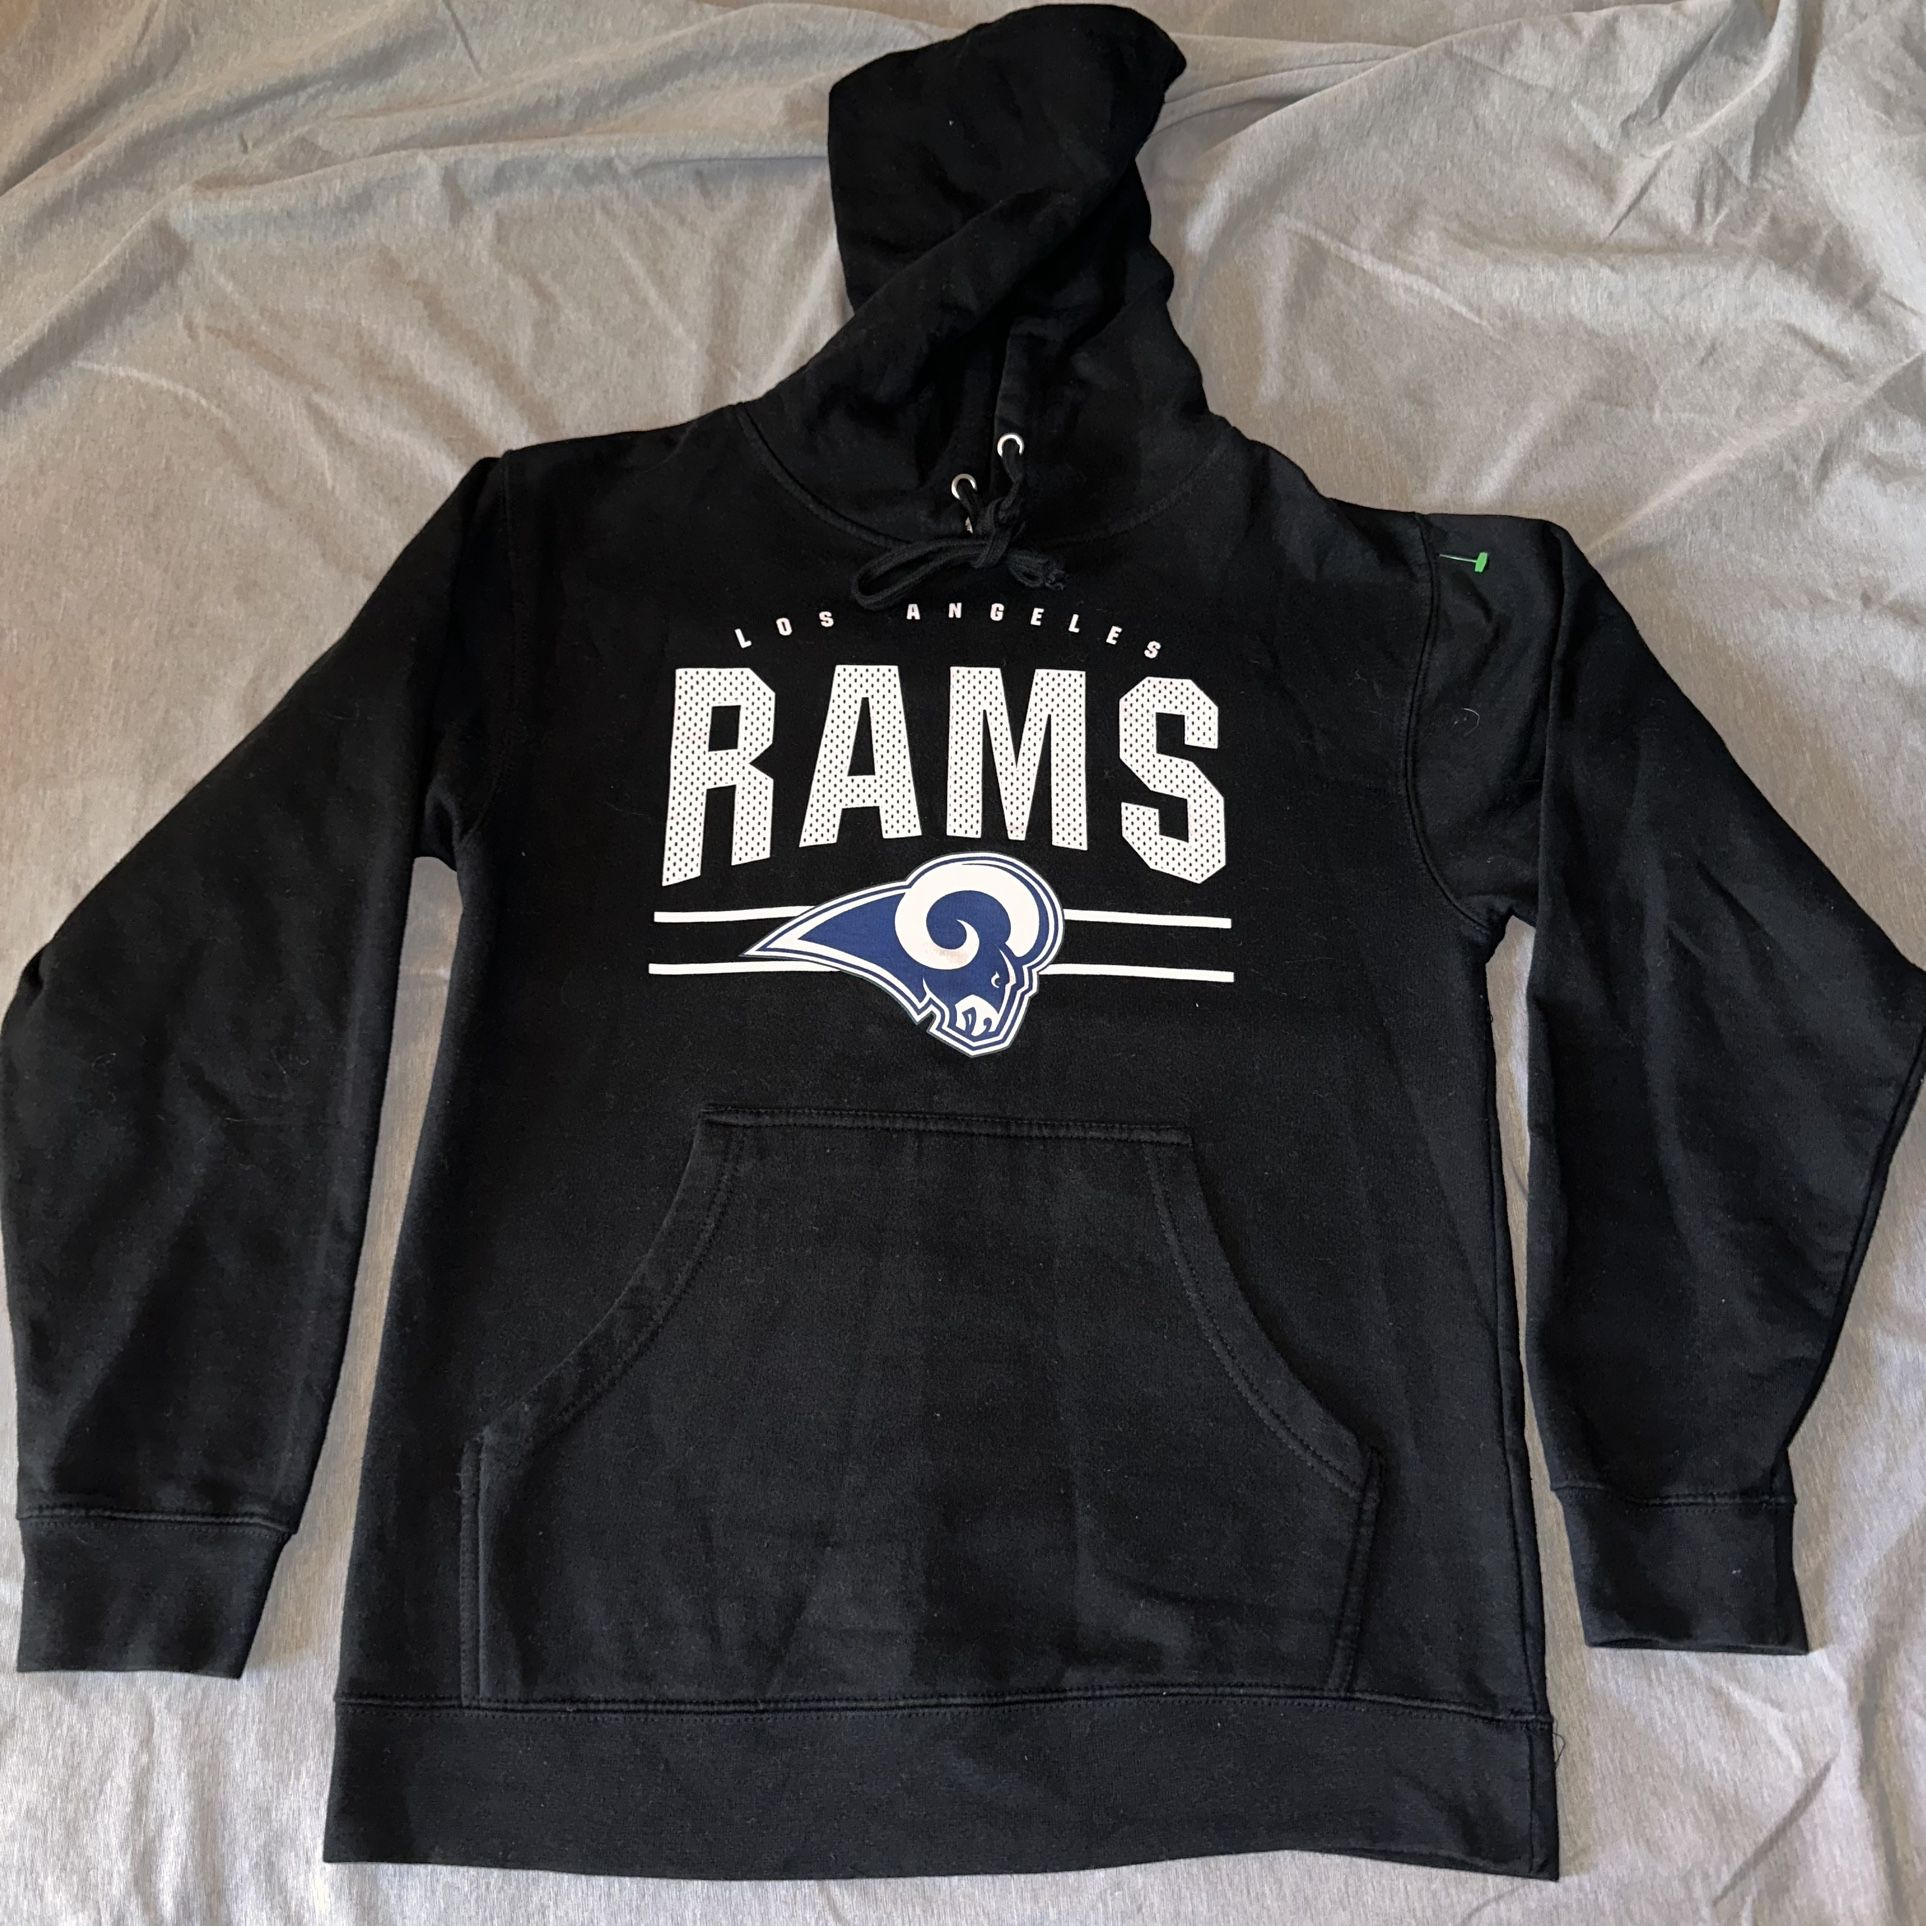 NFL - Los Angeles Rams Hoodie - Small for Sale in Fontana, CA - OfferUp